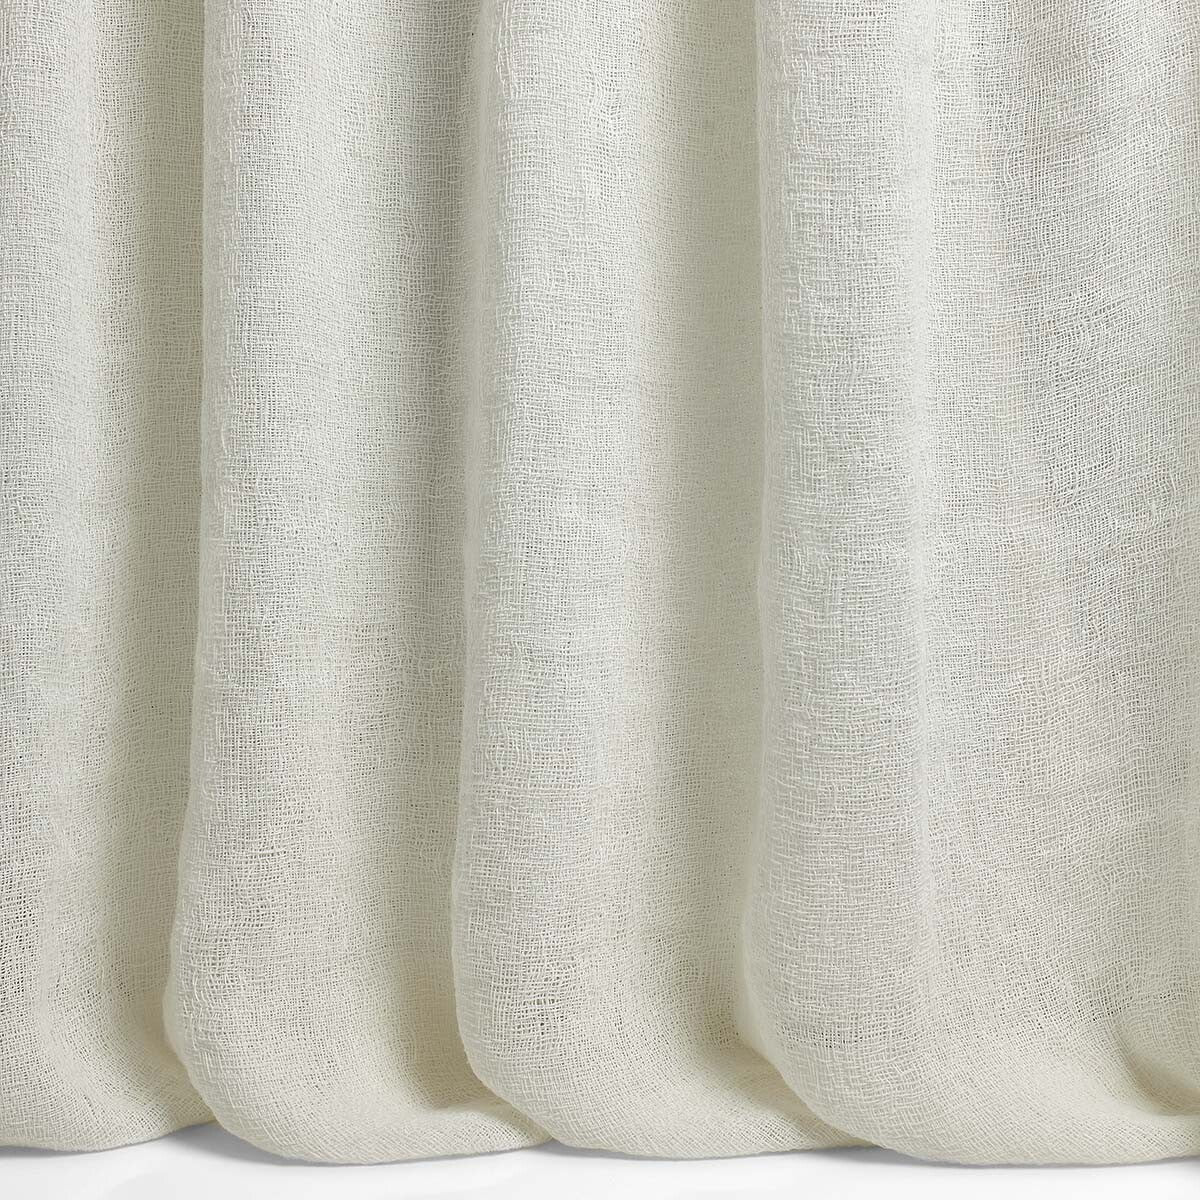 Allegro fabric in 7 color - pattern LZ-30404.07.0 - by Kravet Couture in the Lizzo collection